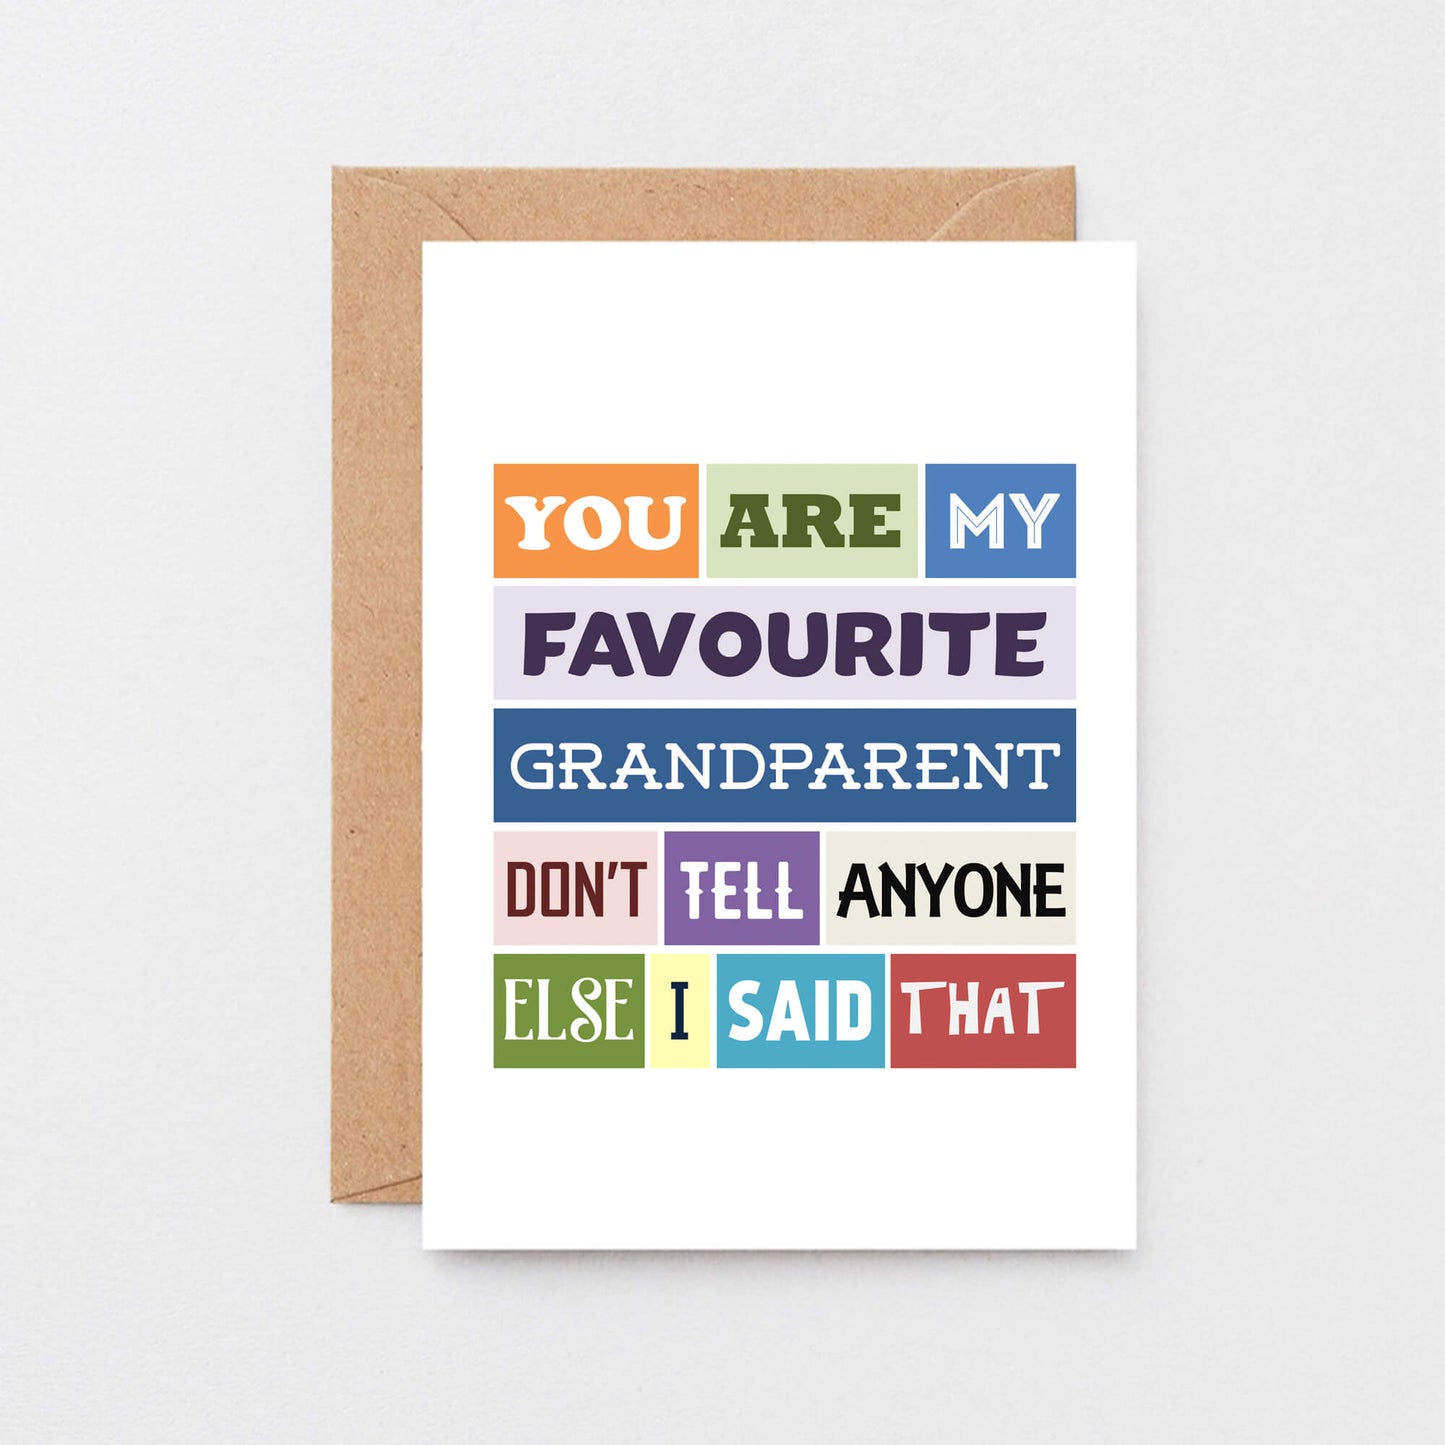 Grandmother Card by SixElevenCreations. Reads You are my favourite grandparent. Don't tell anyone else I said that. Product Code SE0119A6